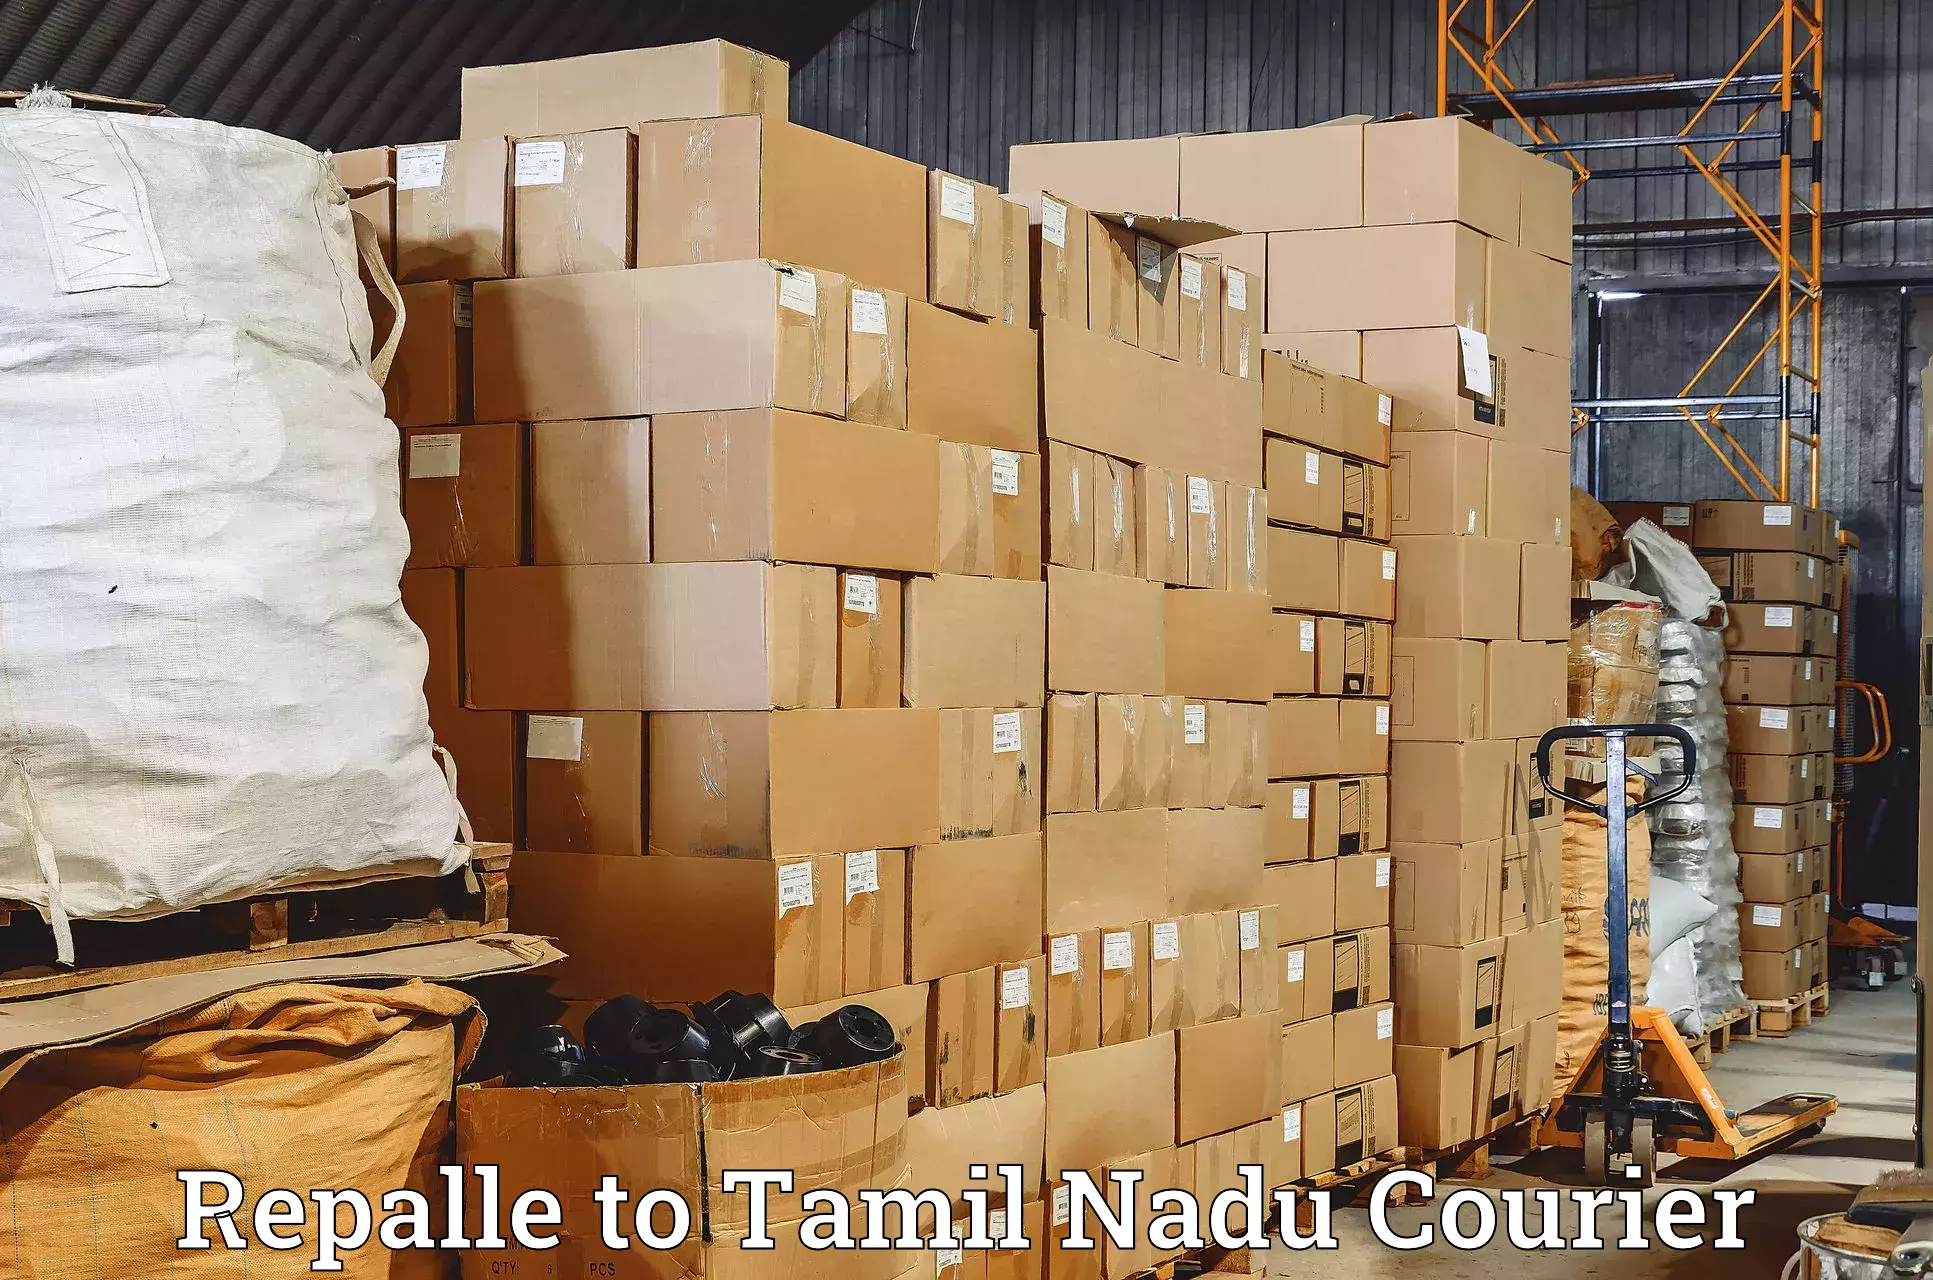 Reliable courier service Repalle to Kalpakkam